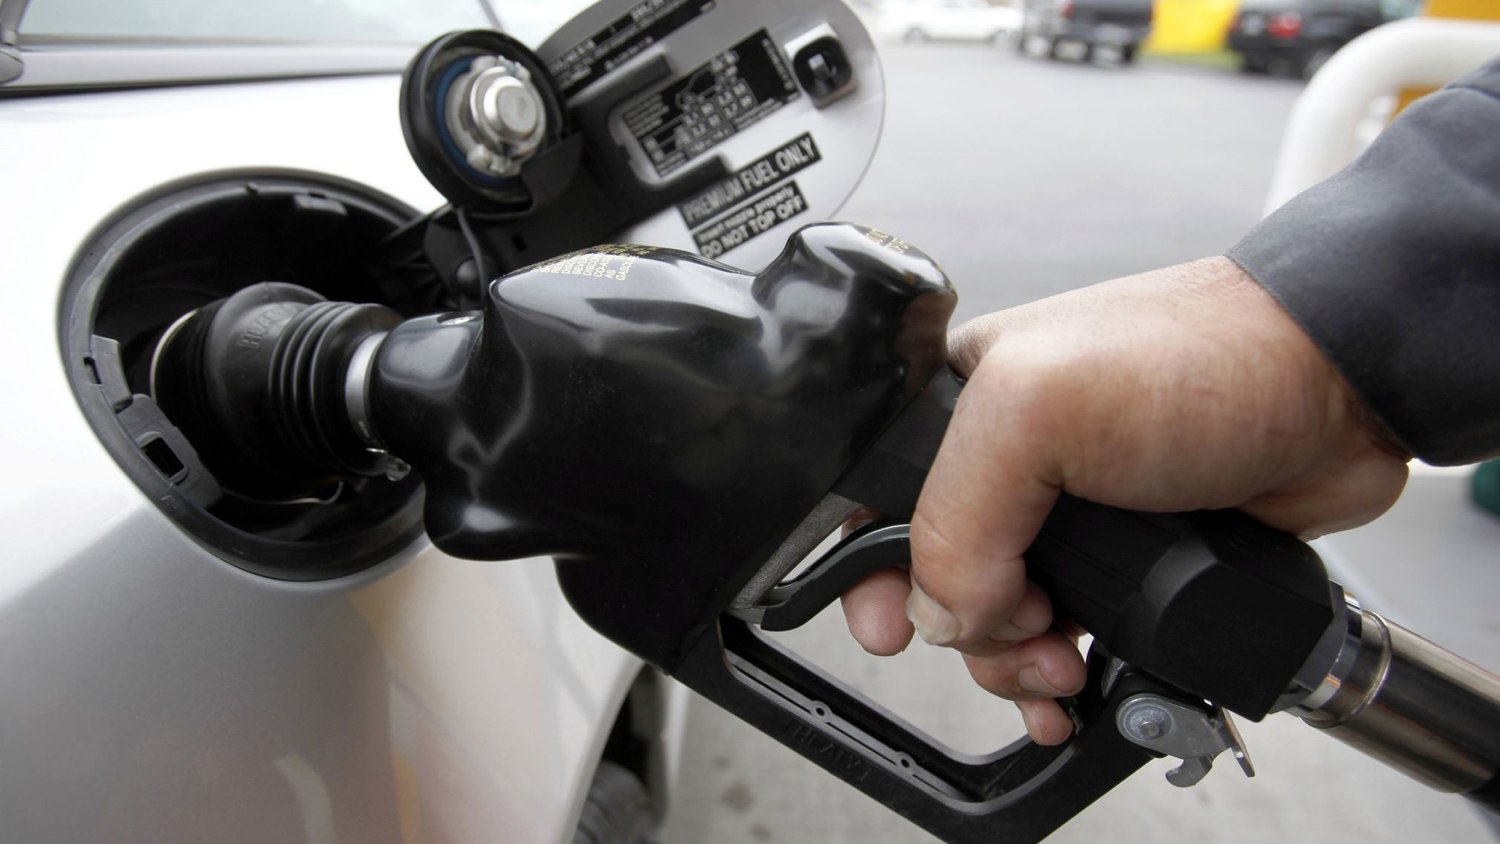 Average retail gasoline prices in the U.S. reached $4.619 per gallon as of Monday, according to the latest data from the American Automobile Association. (Paul Sakuma/Orlando Sentinel/TNS)